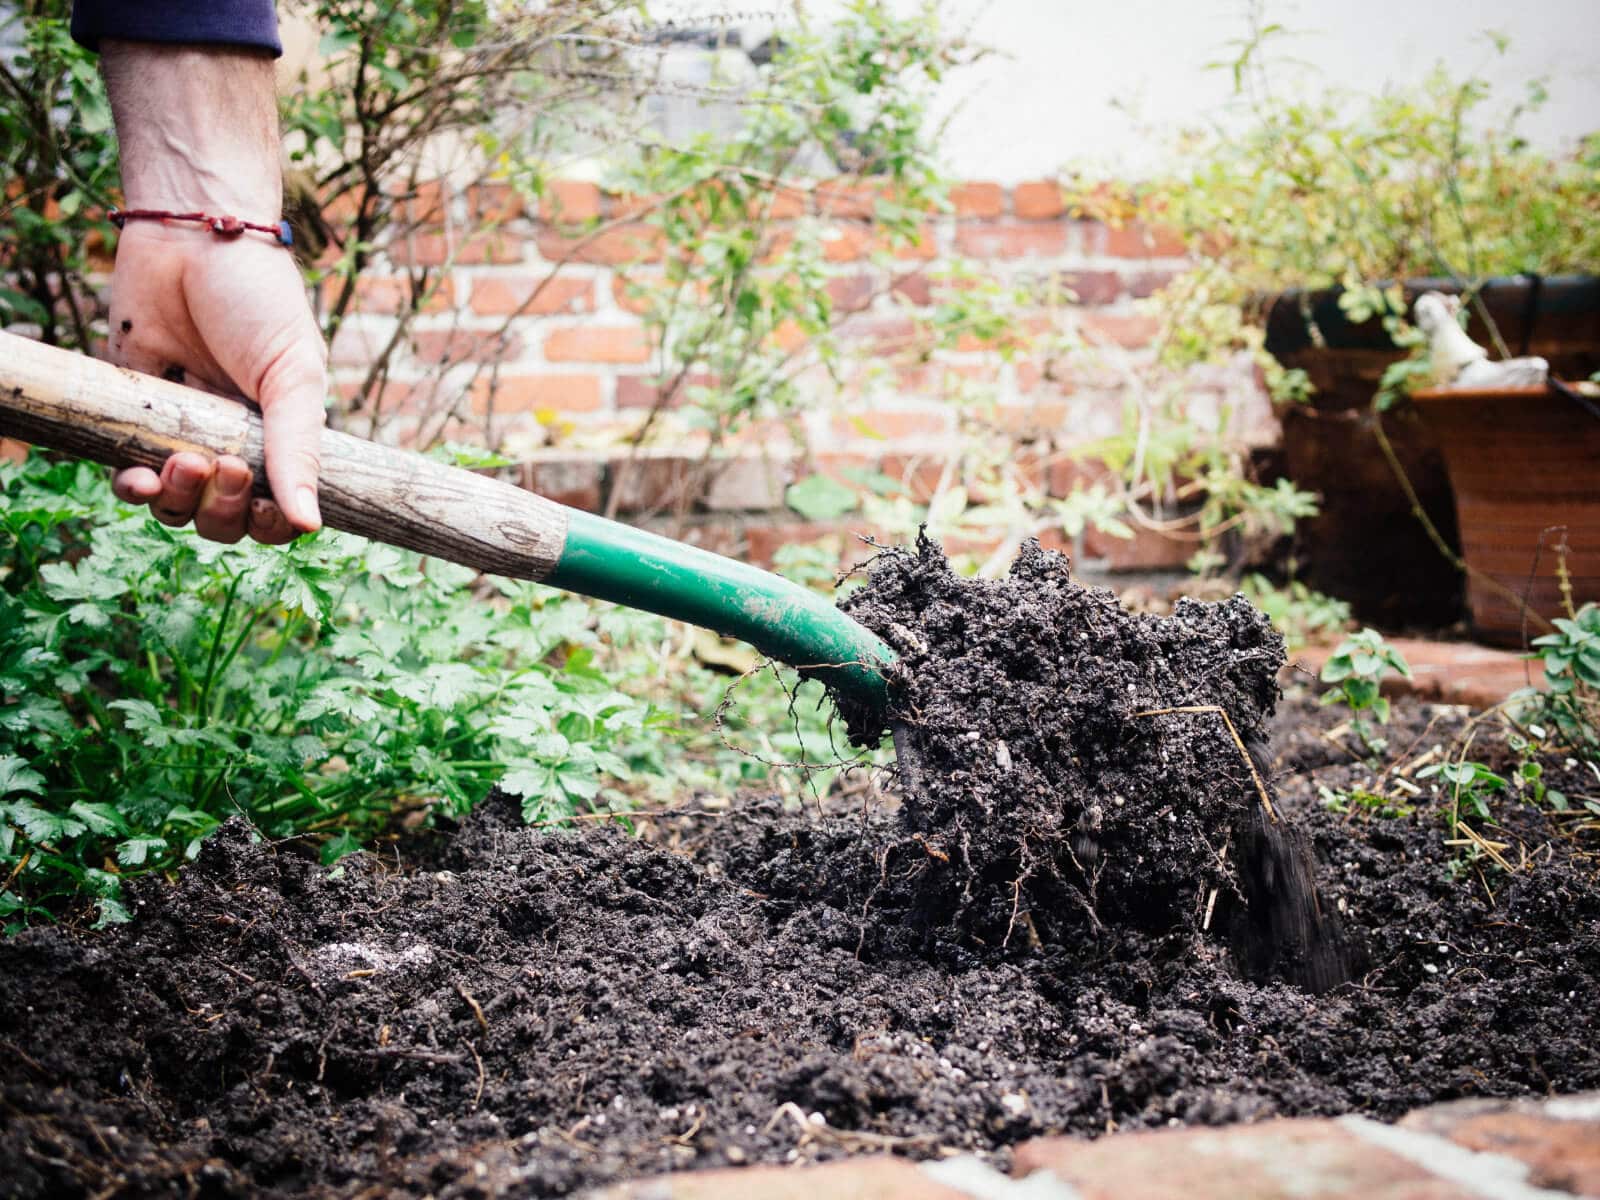 Know the root depth of your plants before preparing your garden beds